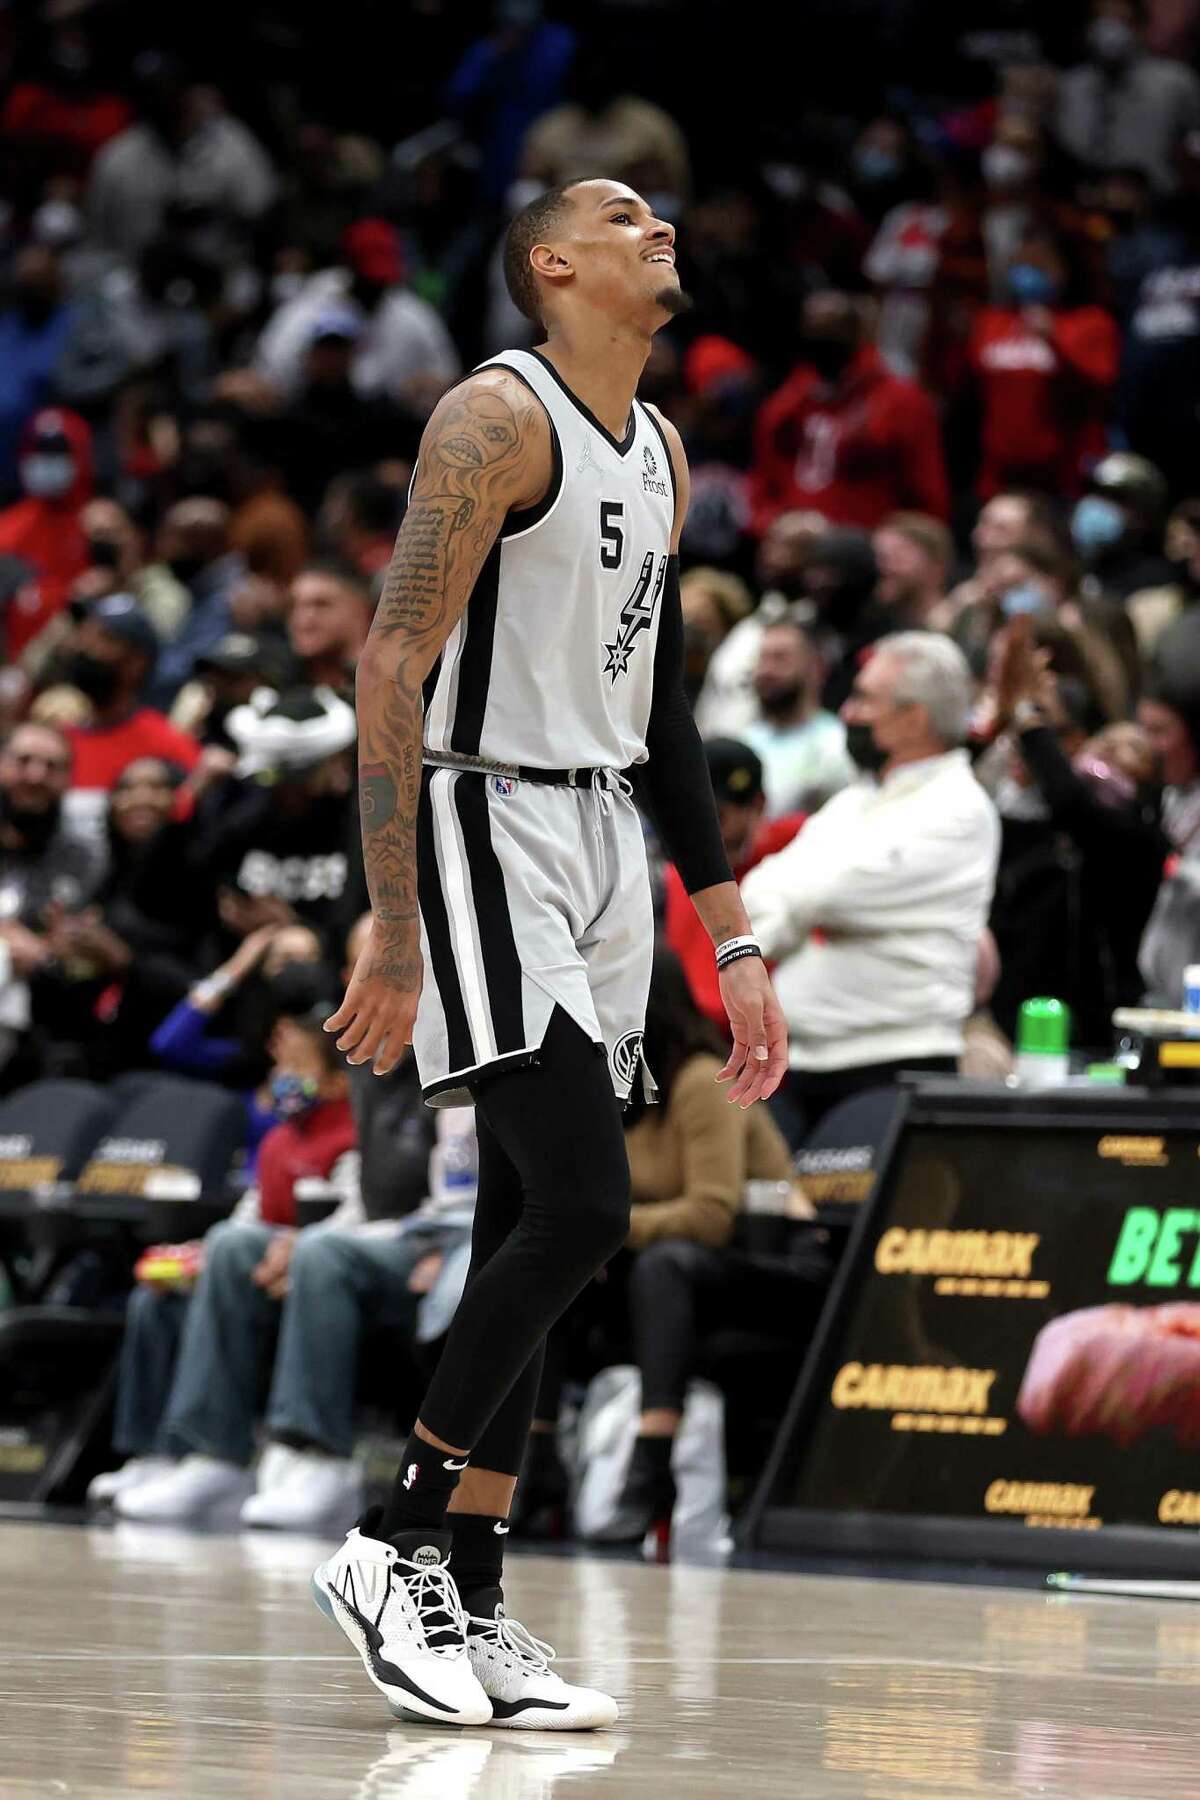 WASHINGTON, DC - FEBRUARY 25: Dejounte Murray #5 of the San Antonio Spurs reacts missing a shot in overtime against the Washington Wizards at Capital One Arena on February 25, 2022 in Washington, DC. NOTE TO USER: User expressly acknowledges and agrees that, by downloading and or using this photograph, User is consenting to the terms and conditions of the Getty Images License Agreement. (Photo by Rob Carr/Getty Images)